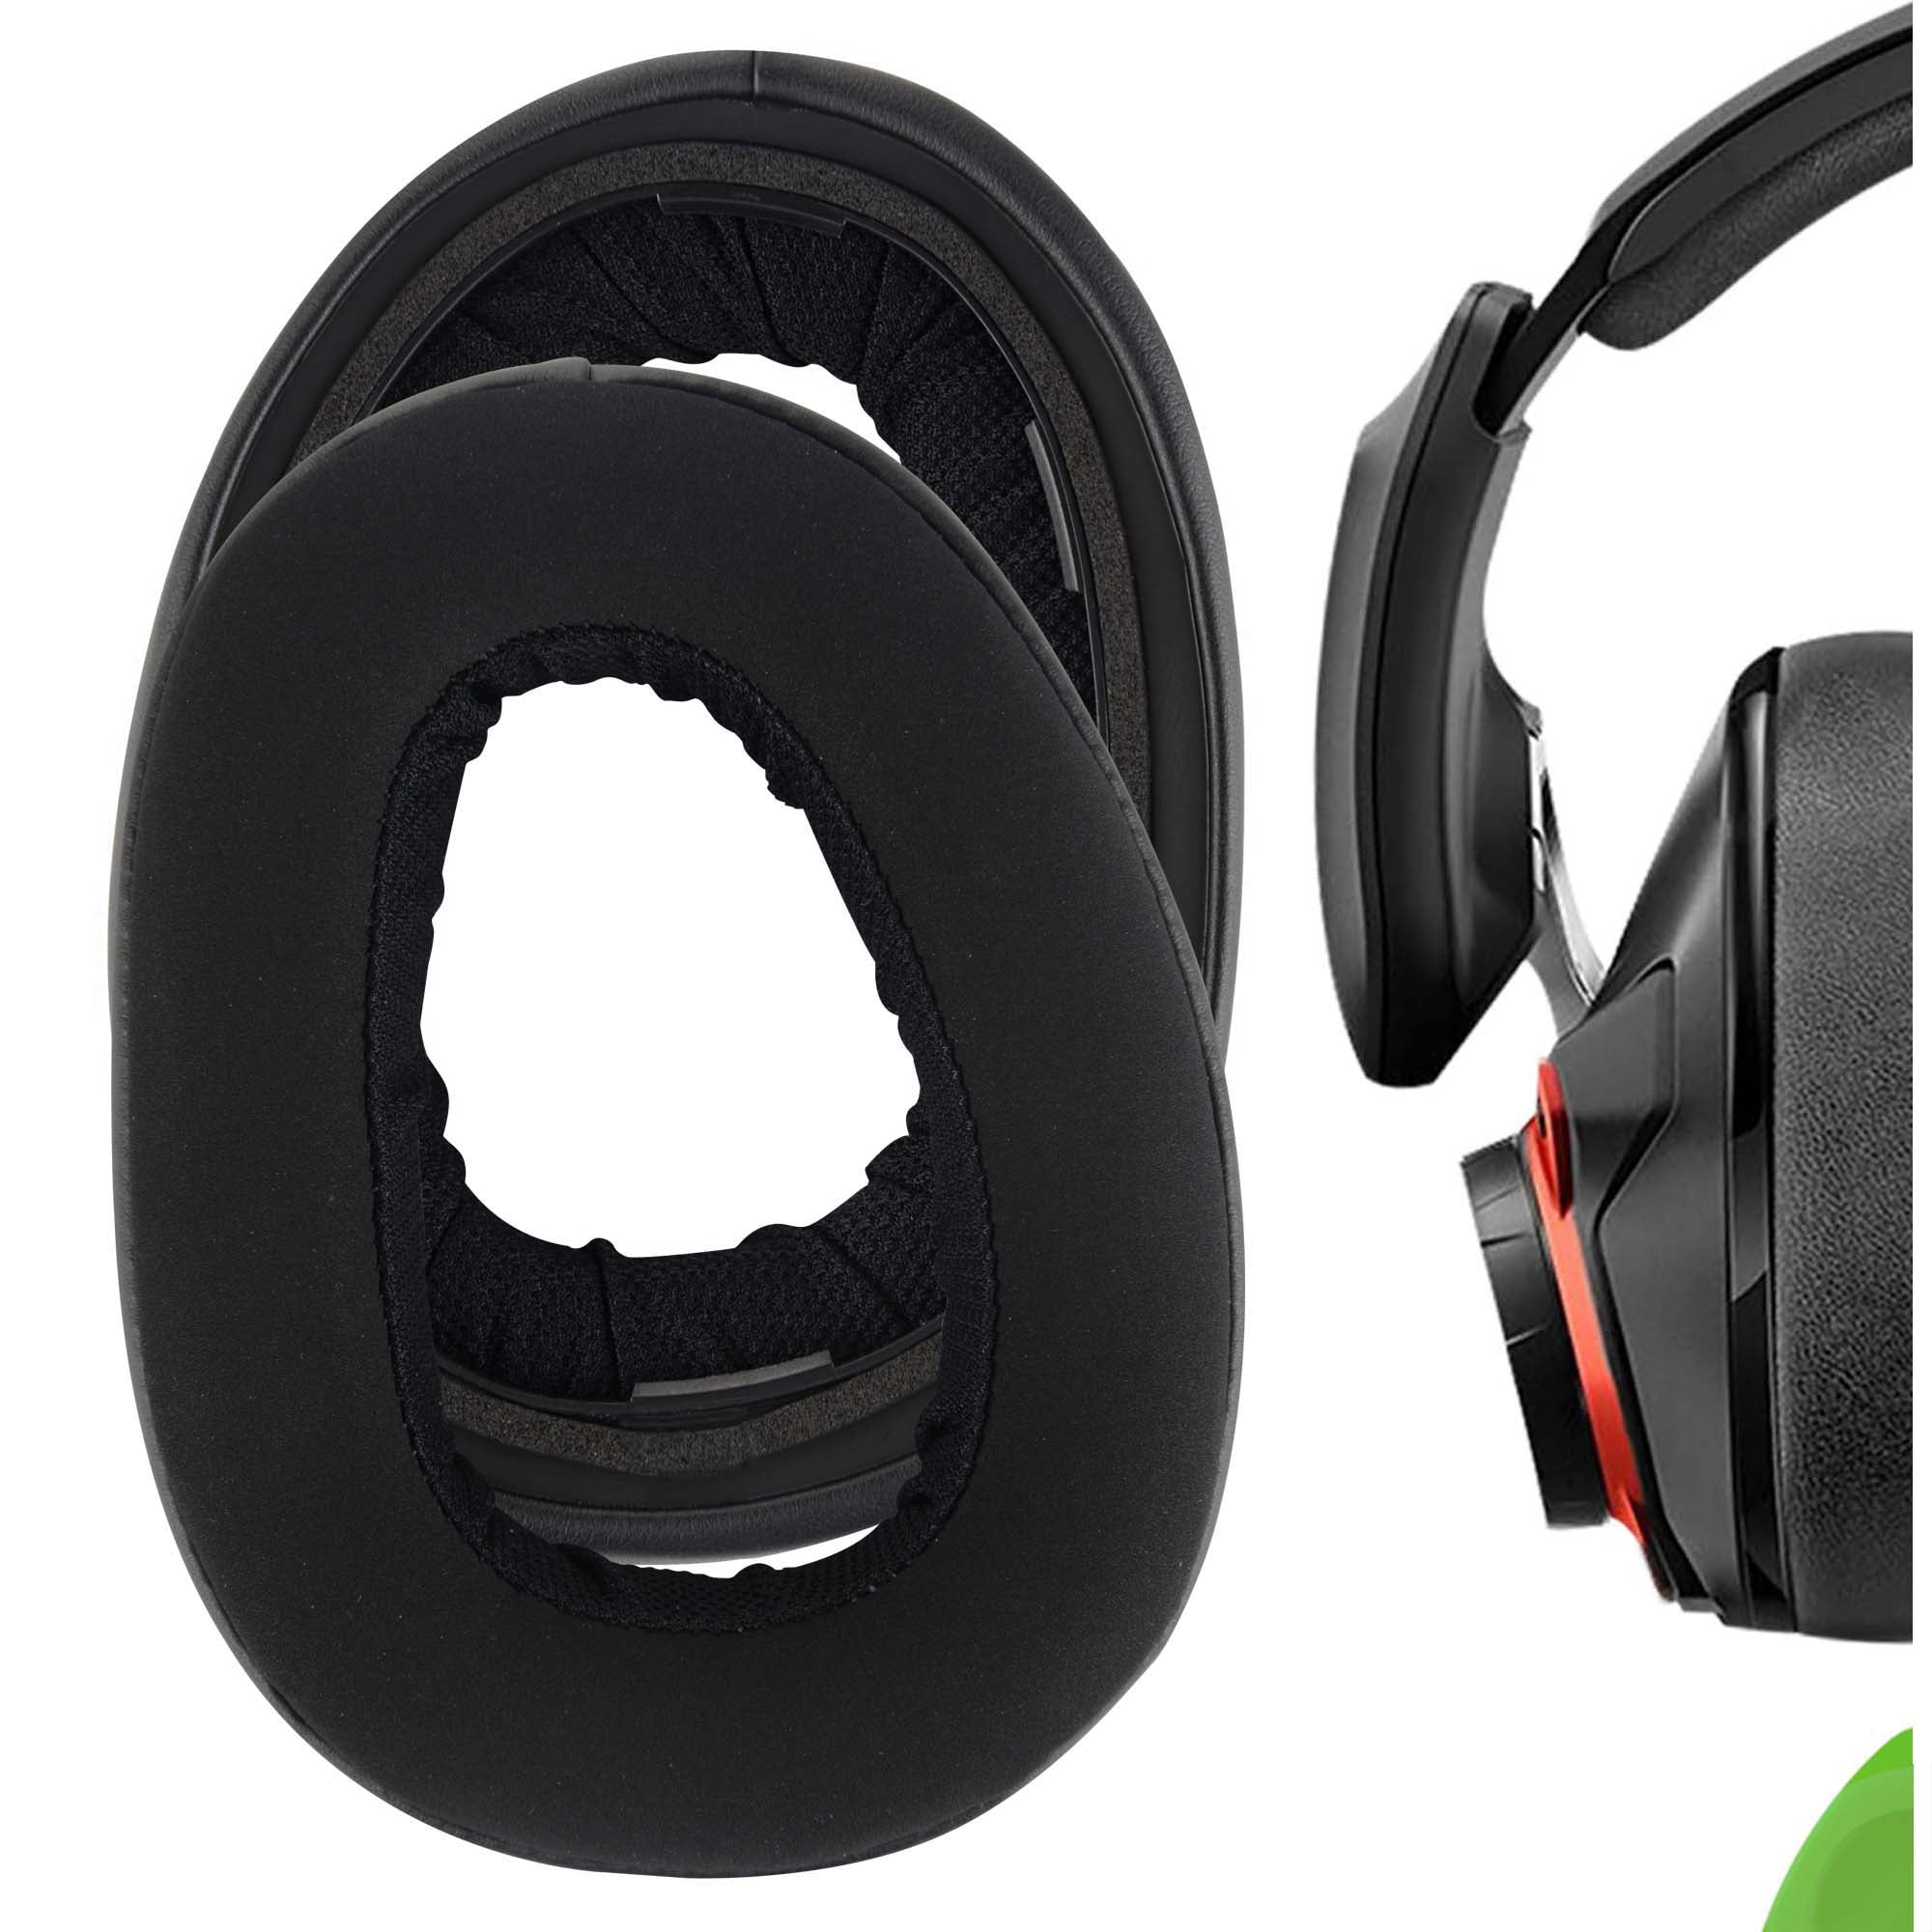 Geekria Comfort Hybrid Velour Replacement Ear Pads for Sennheiser GSP